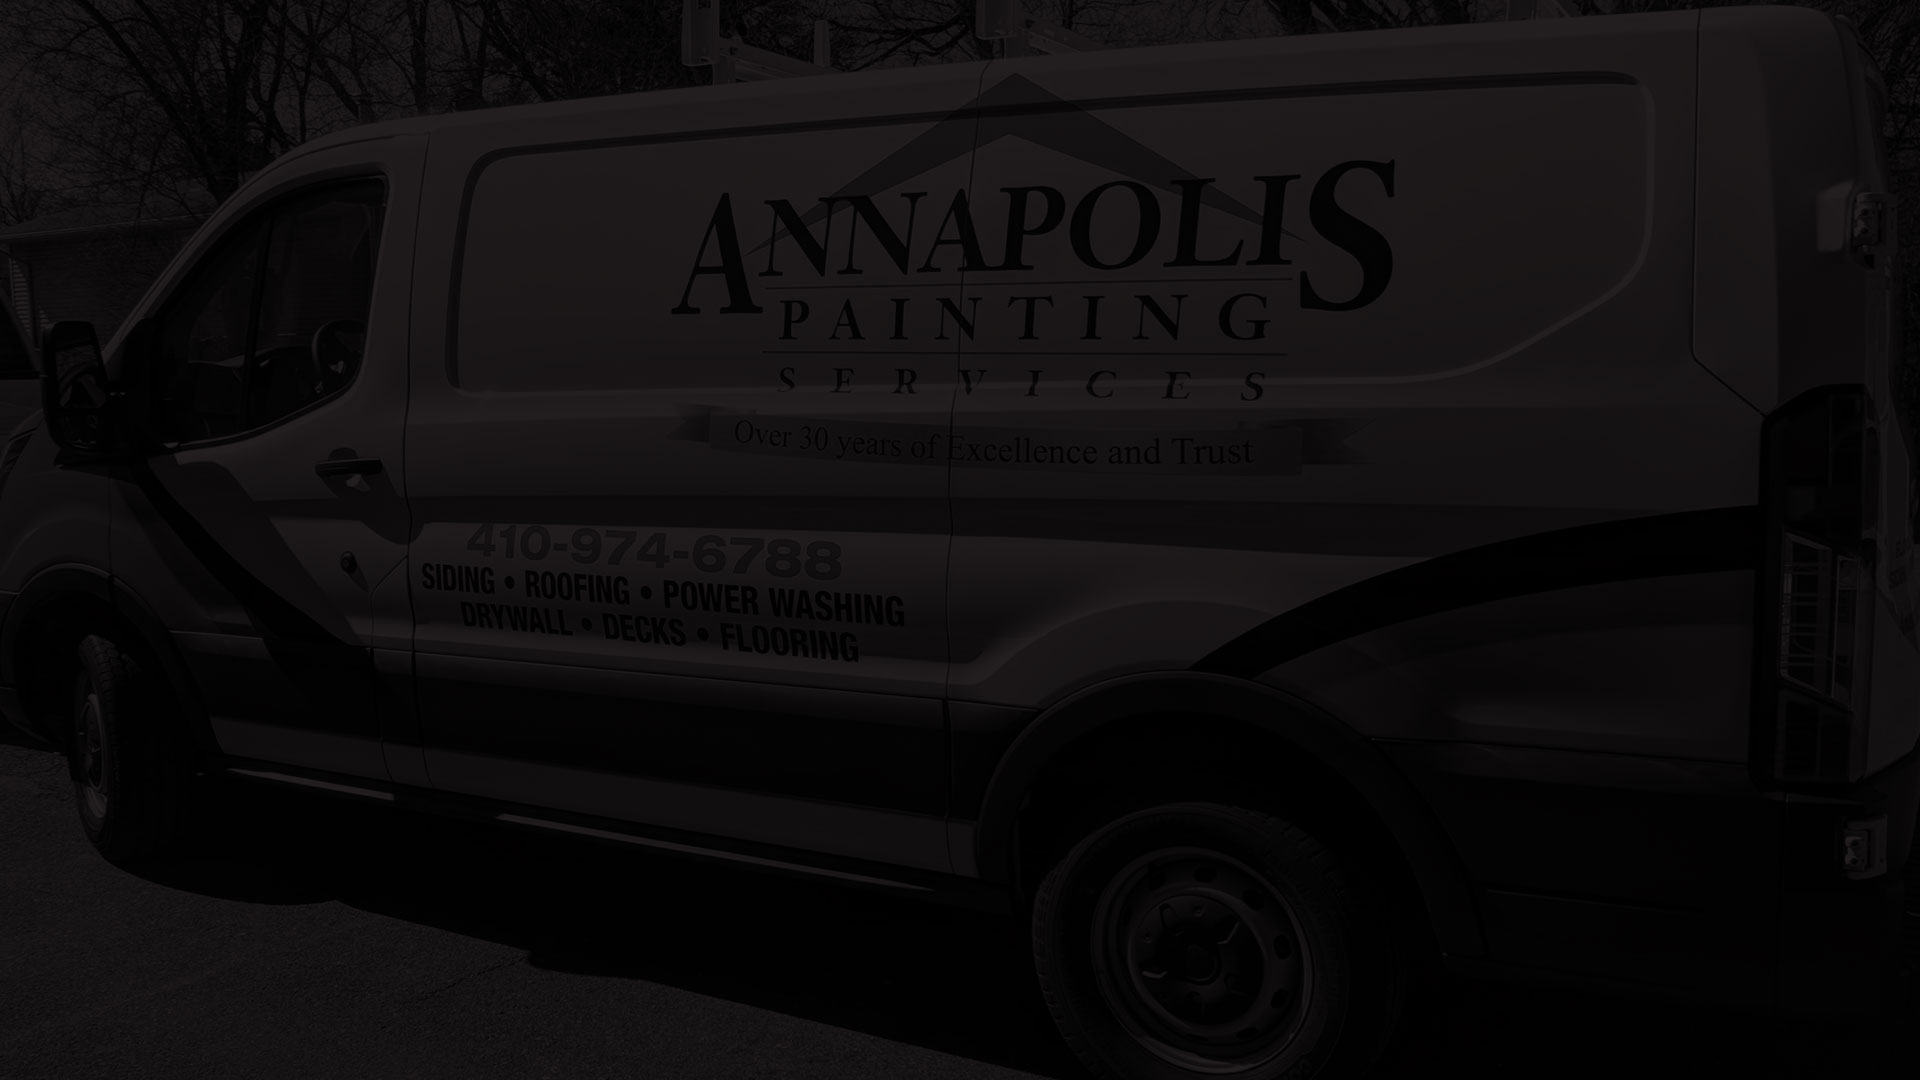 Annapolis Painting Services Contact Form